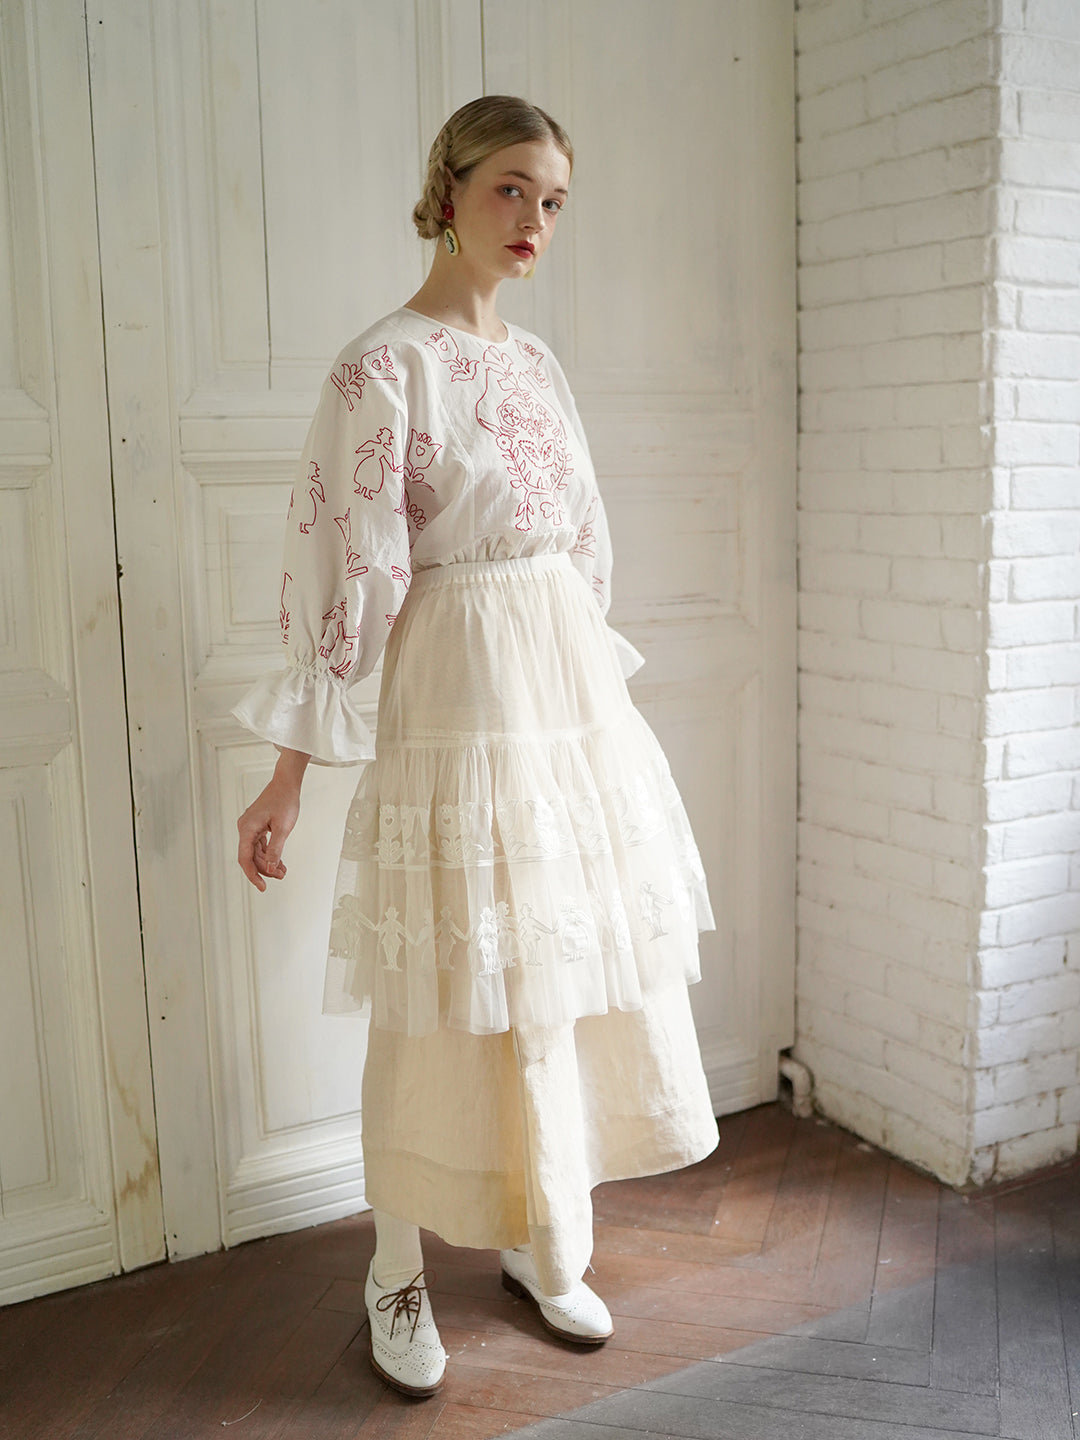 Unlogical Poem Paper-cut Patch Embroidered Mesh Skirt